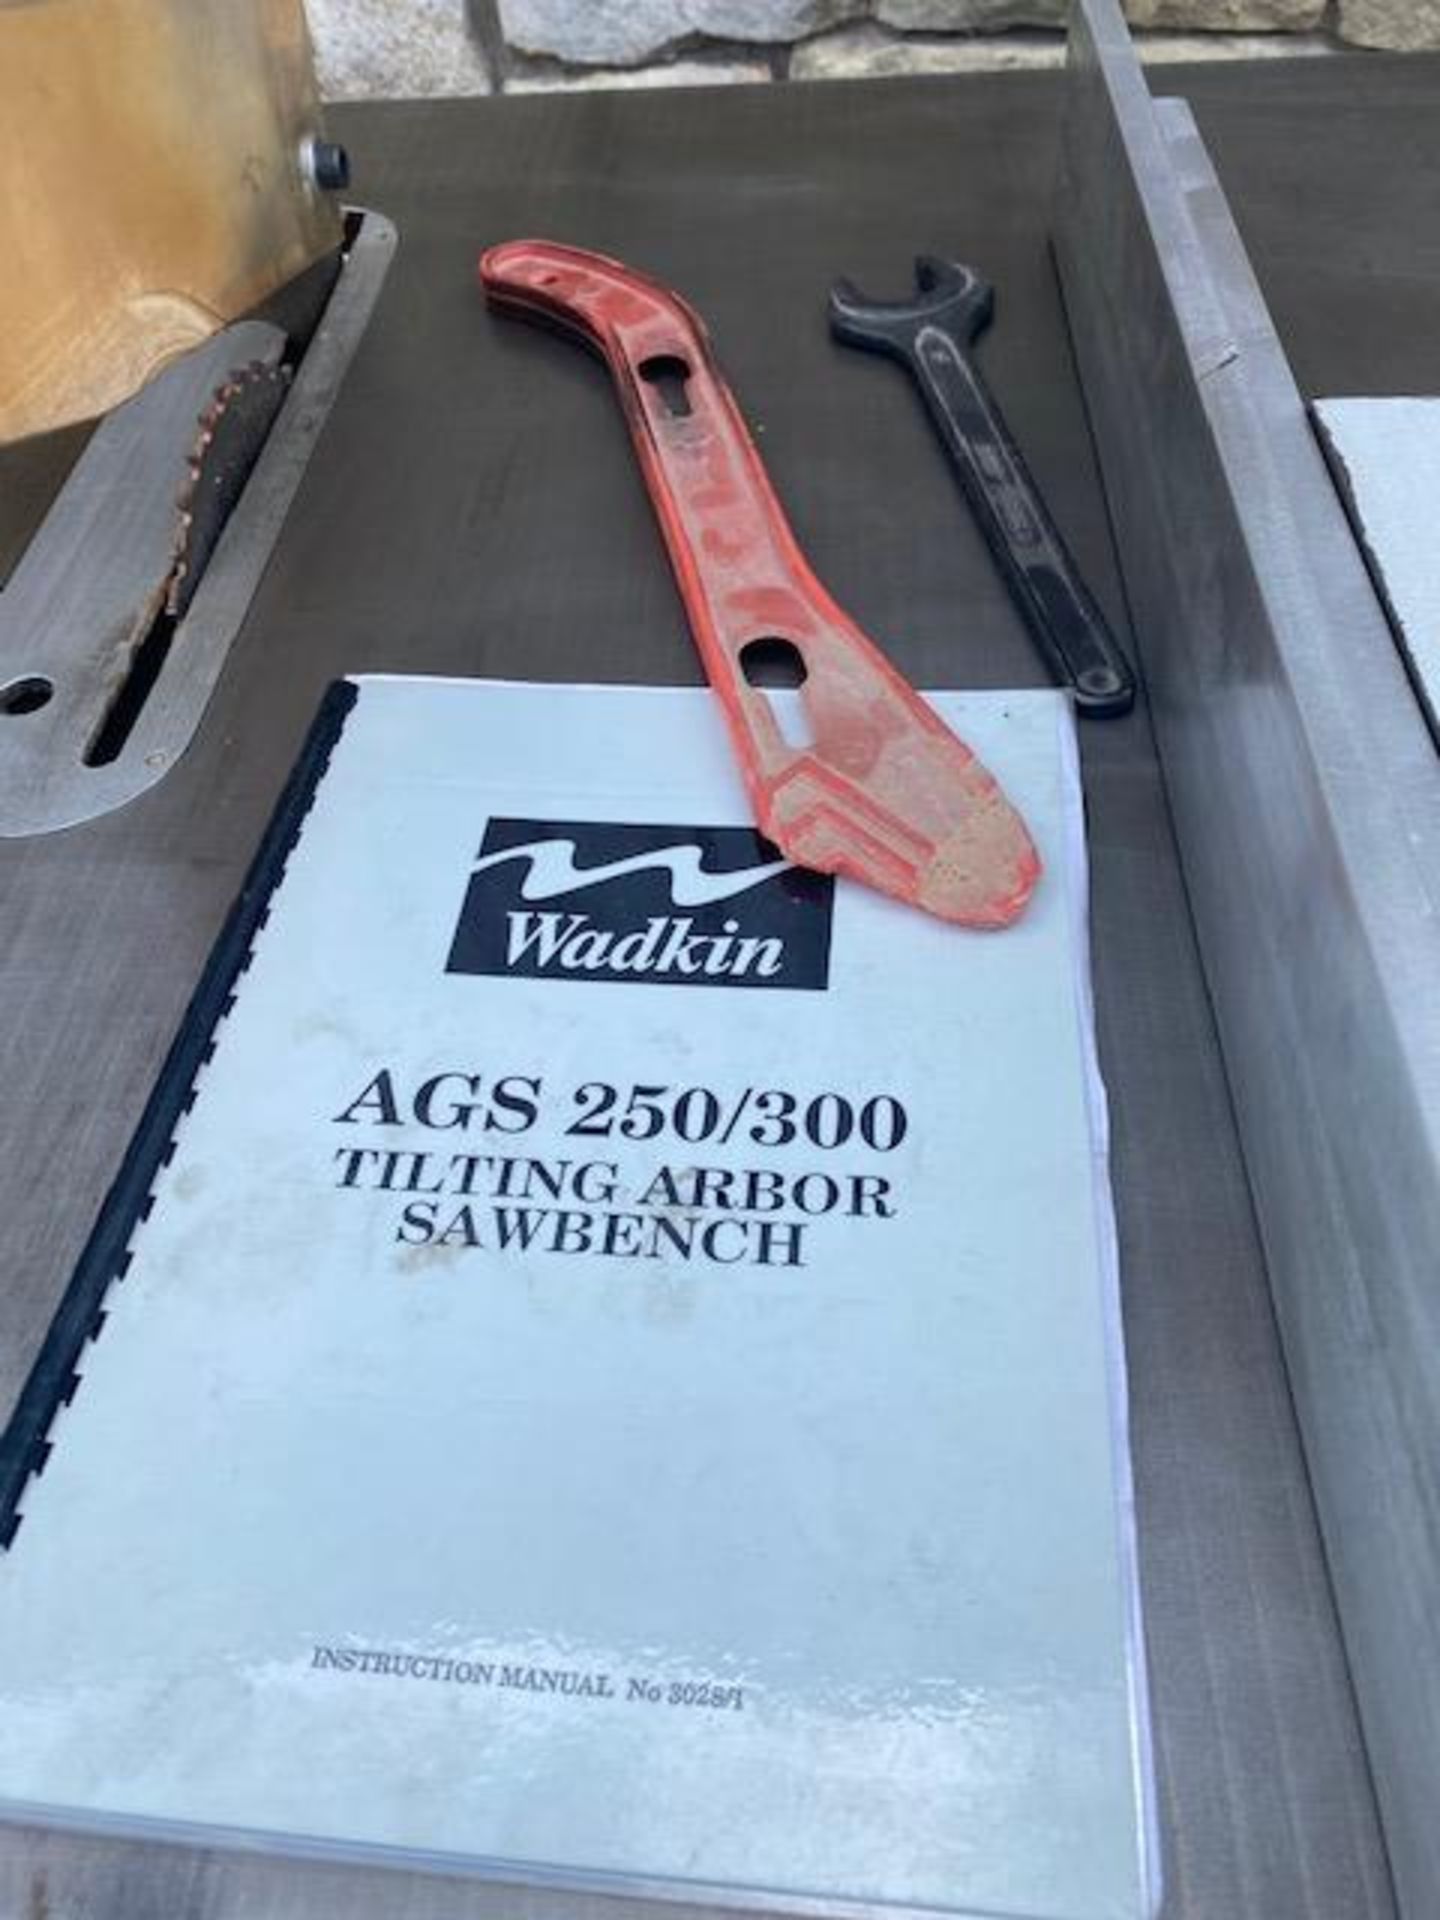 Wadkin AGS 250/300 Tilting Arbor Saw Bench (recently refurbished), serial no. 976714, 45 degree - Image 3 of 9